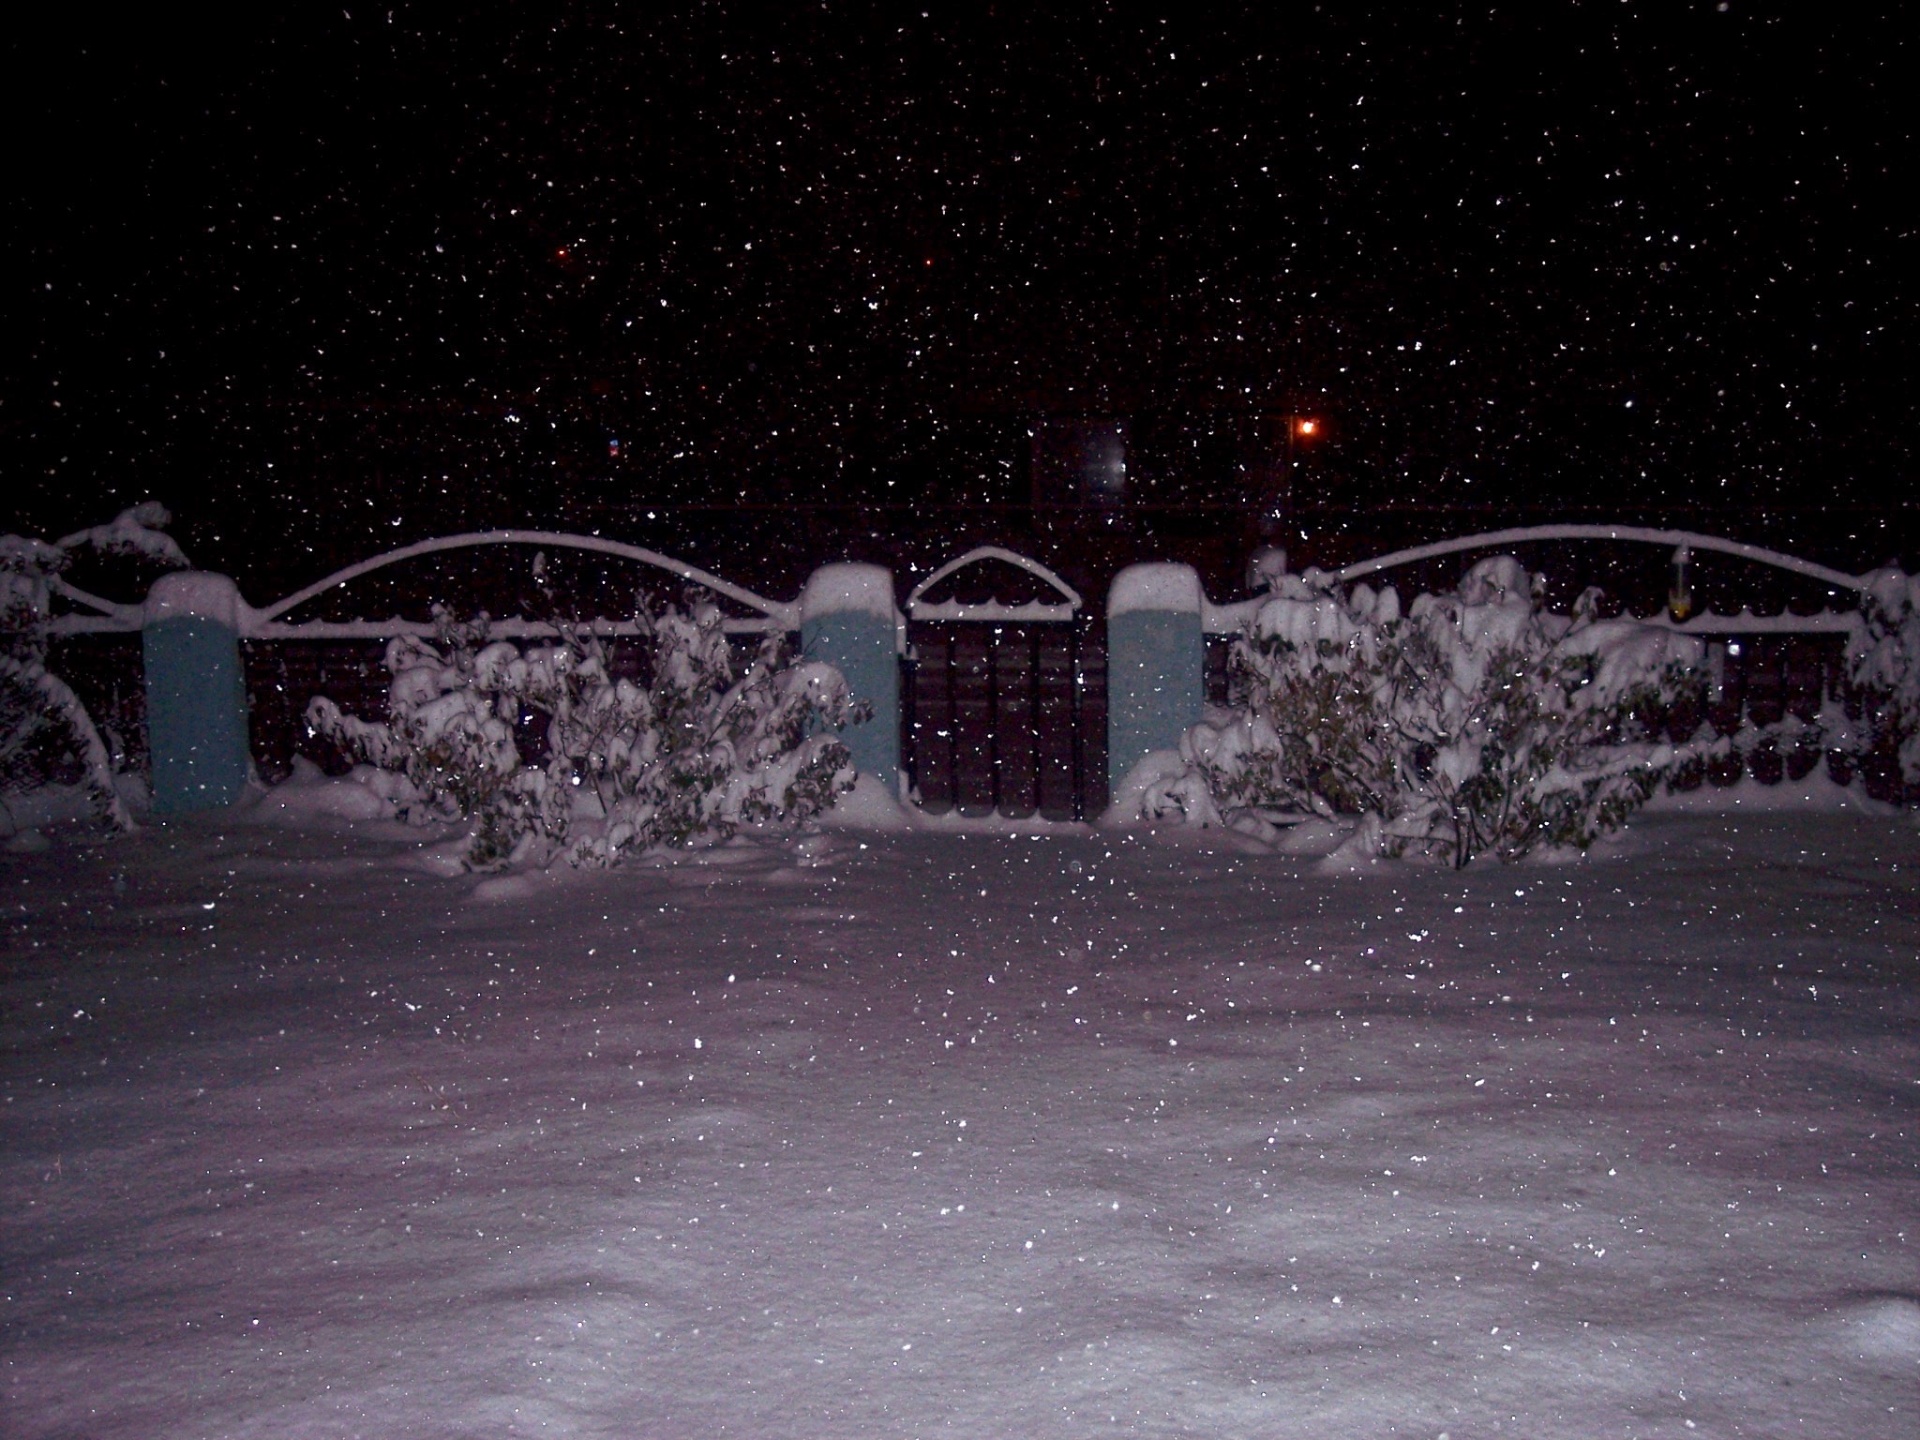 This photo was taken on the first heavy snow of 2009 in Western Colorado.